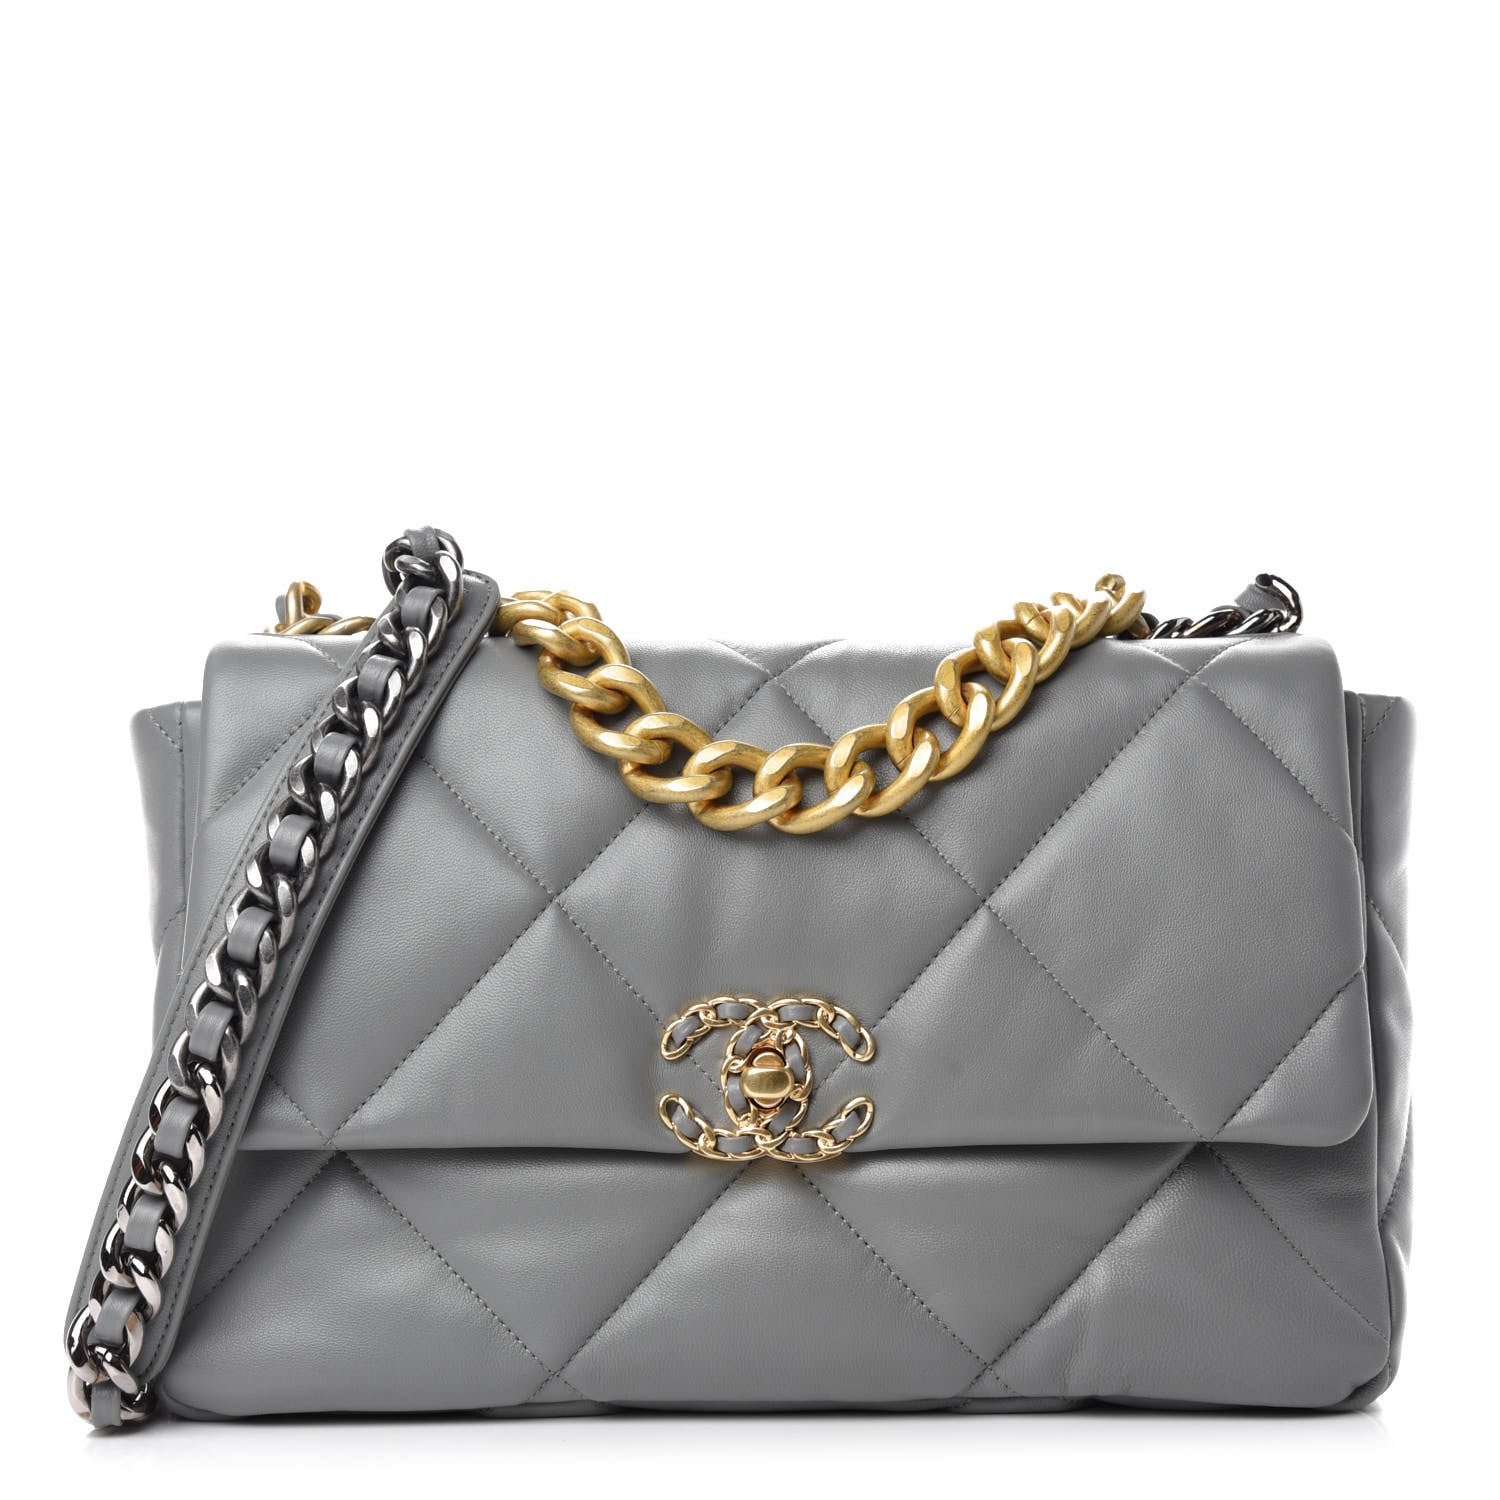 Chanel 19 Large Gray Leather Handbag available now